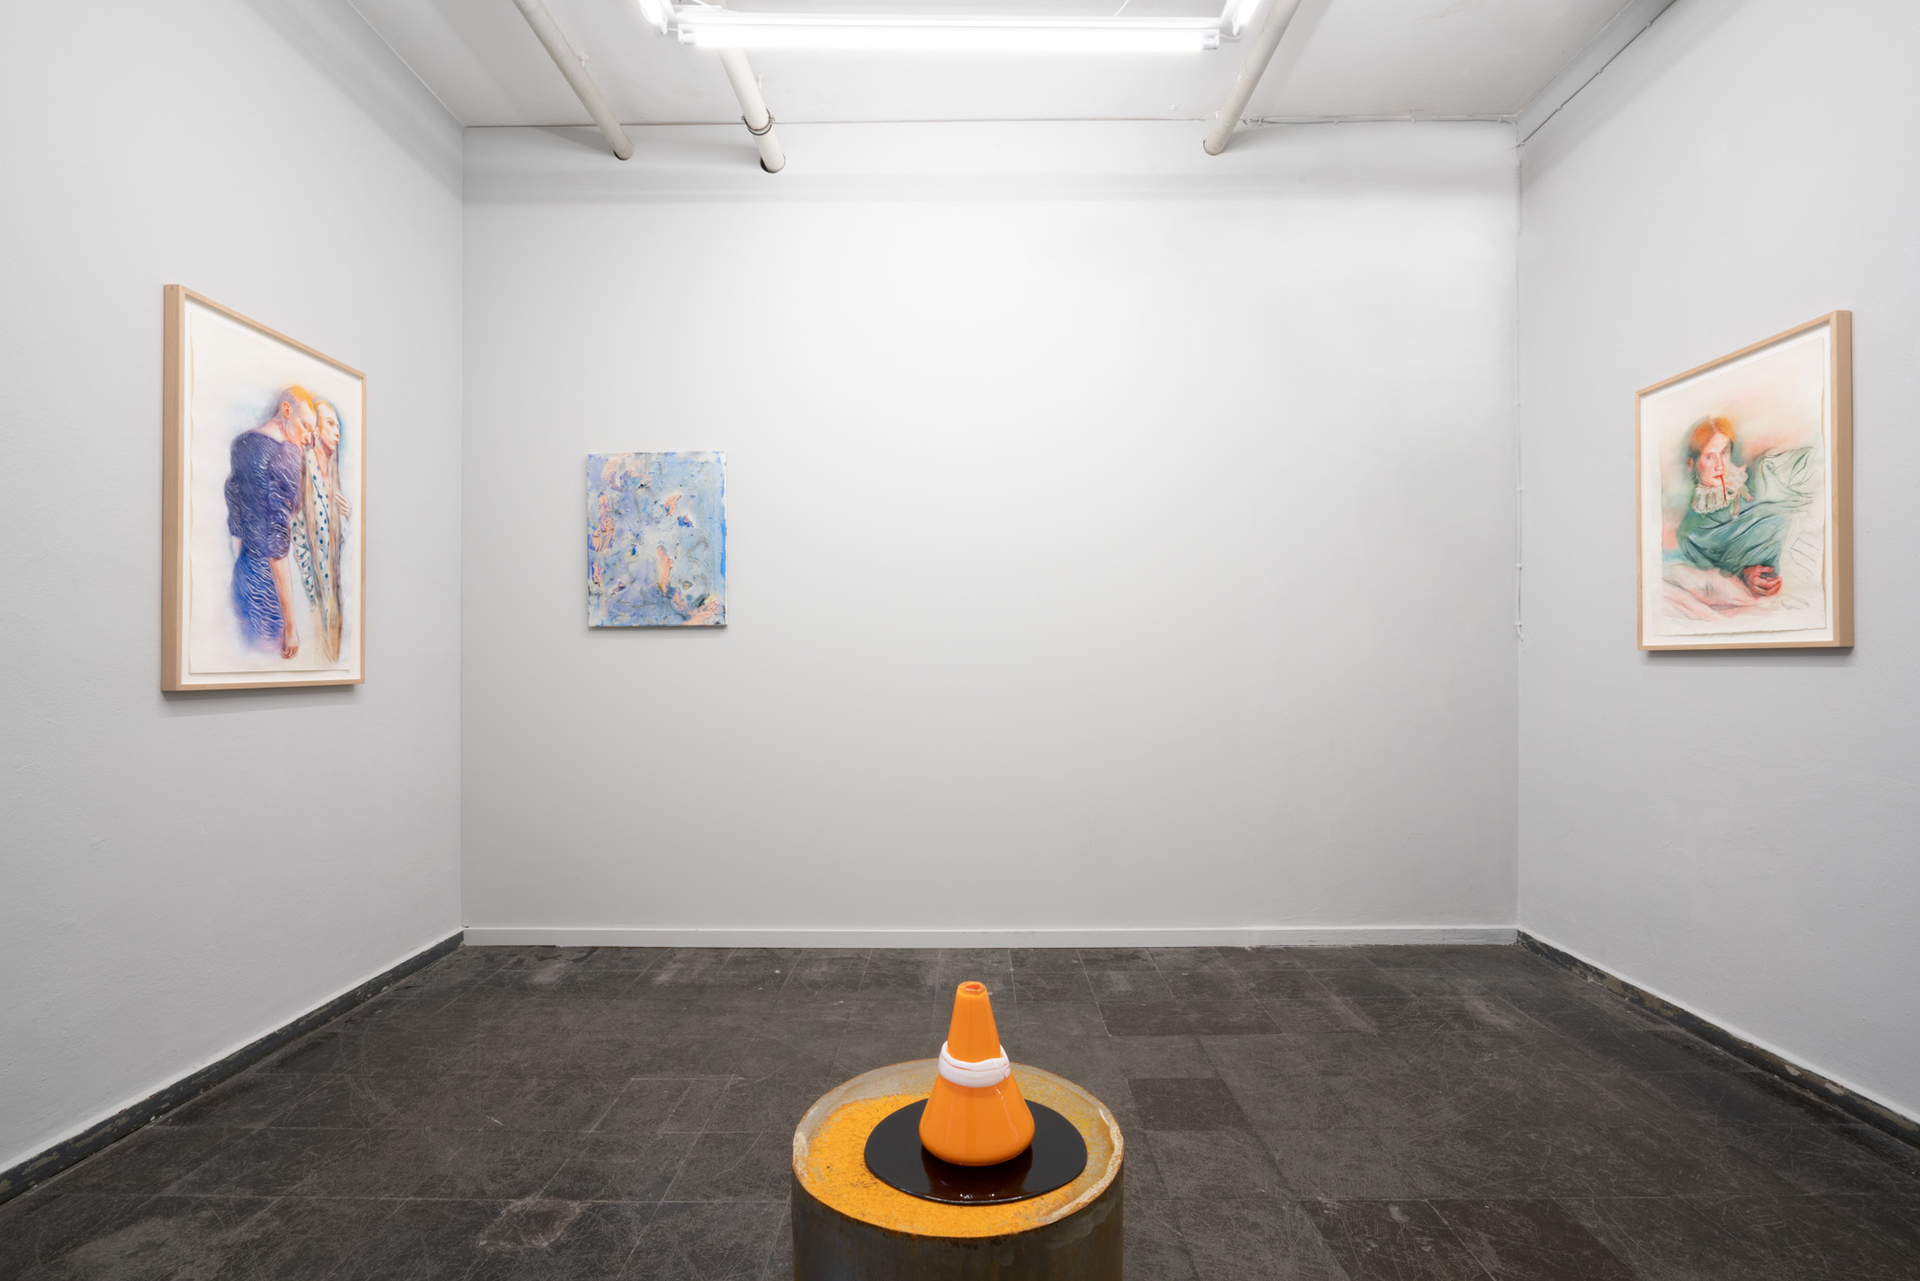 From left to right:   MARIANNA IGNATAKI, Jake & Jason, 2021 Watercolor, gouache, color pigments, graphite and colored pencils on paper 87x55cm  ALANA LAKE, Cum & Gum, 2021 Oil, pigment and epoxy on canvas  ALANA LAKE, Warning Signs, 2020 Hand blown glass, and steel plinth 36 x 33.5 x 28 cm  MARIANNA IGNATAKI, Luke, 2021 Watercolor, gouache, color pigments, graphite and colored pencils on paper 71x52cm